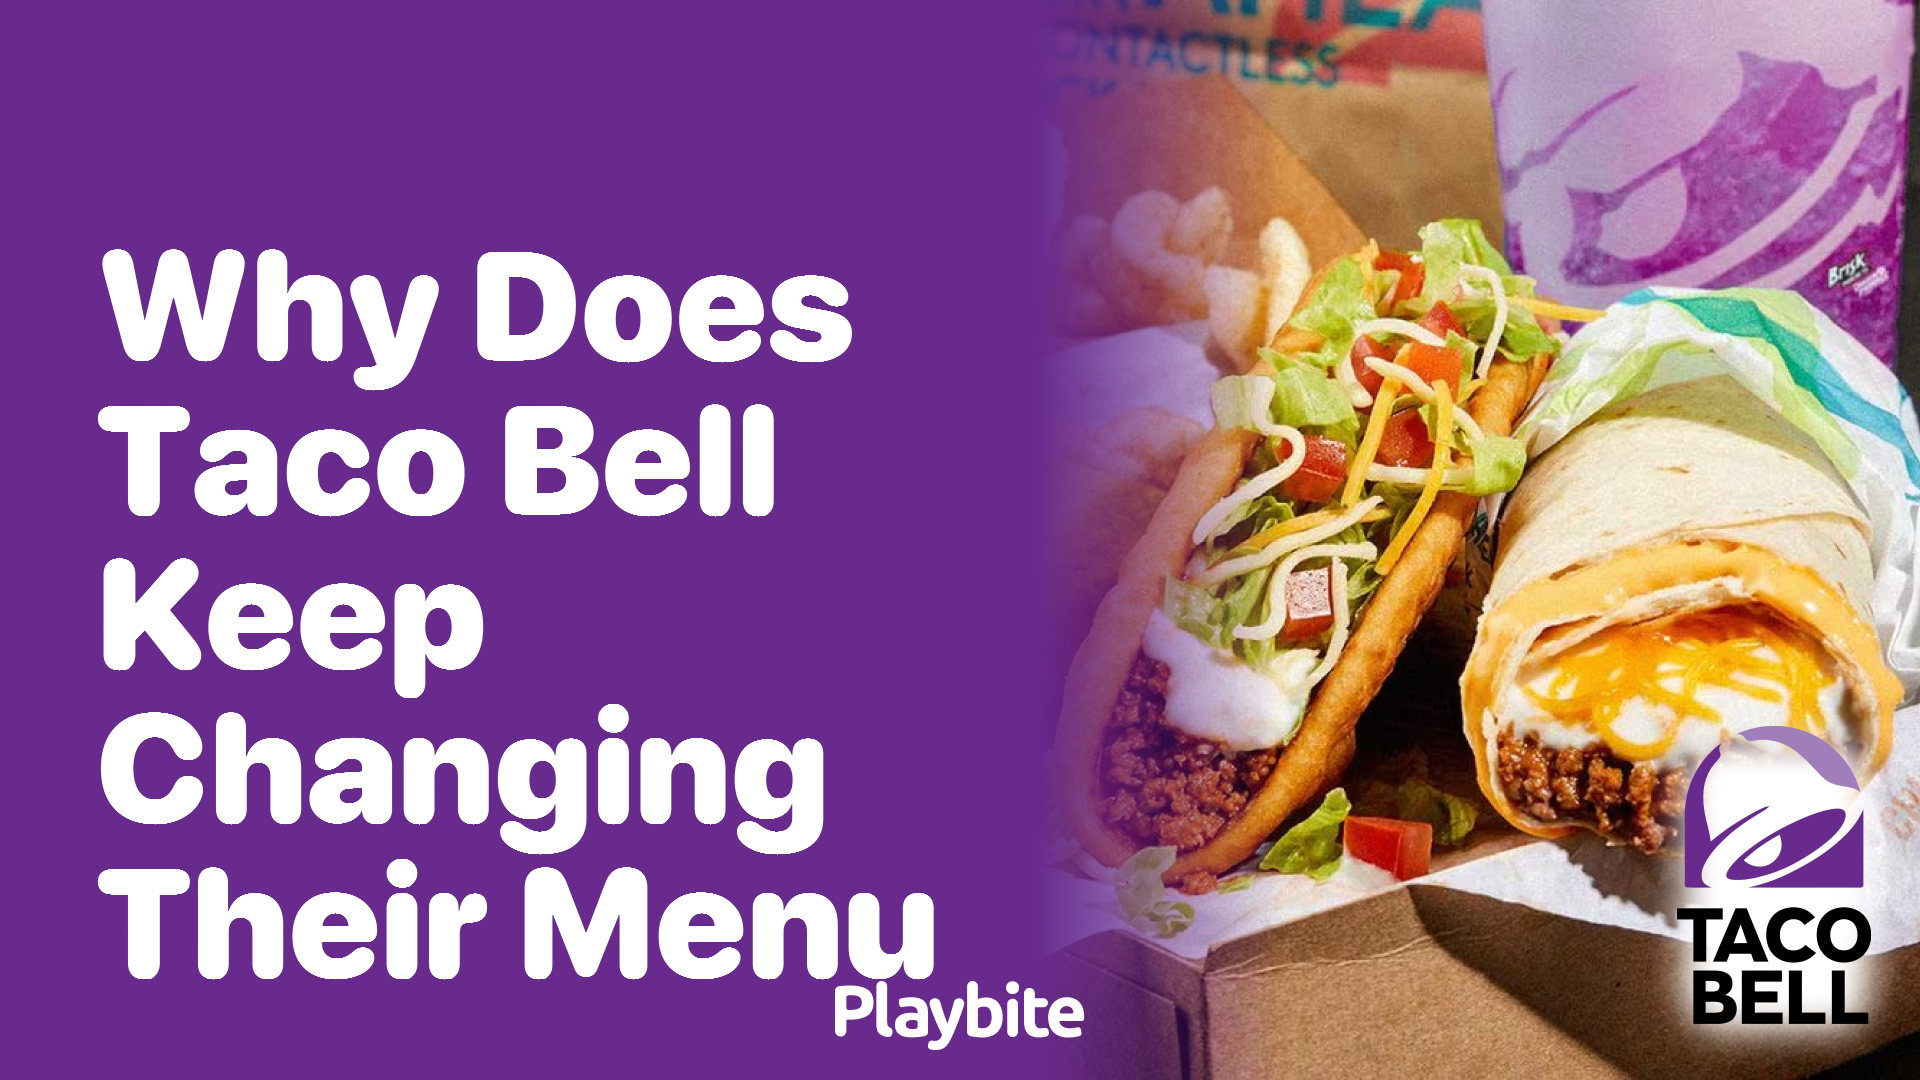 Why Does Taco Bell Keep Changing Their Menu? Unwrapping the Mystery